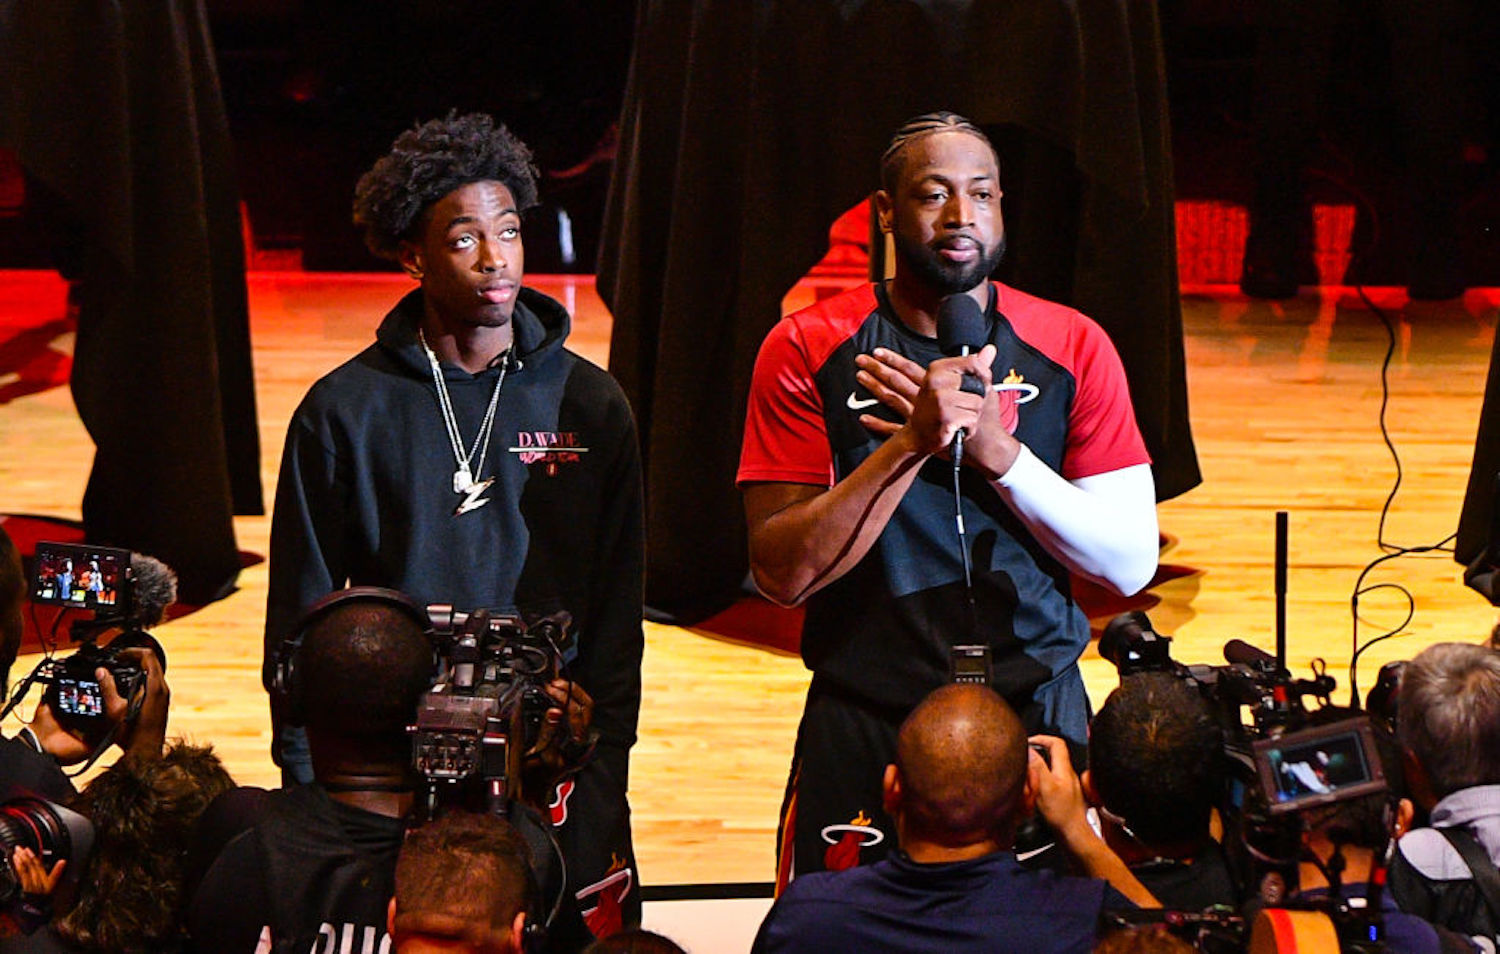 Dwyane Wade's teenage son Zaire is growing into a star basketball prospect, but he still gets humbled by his old man on the court.